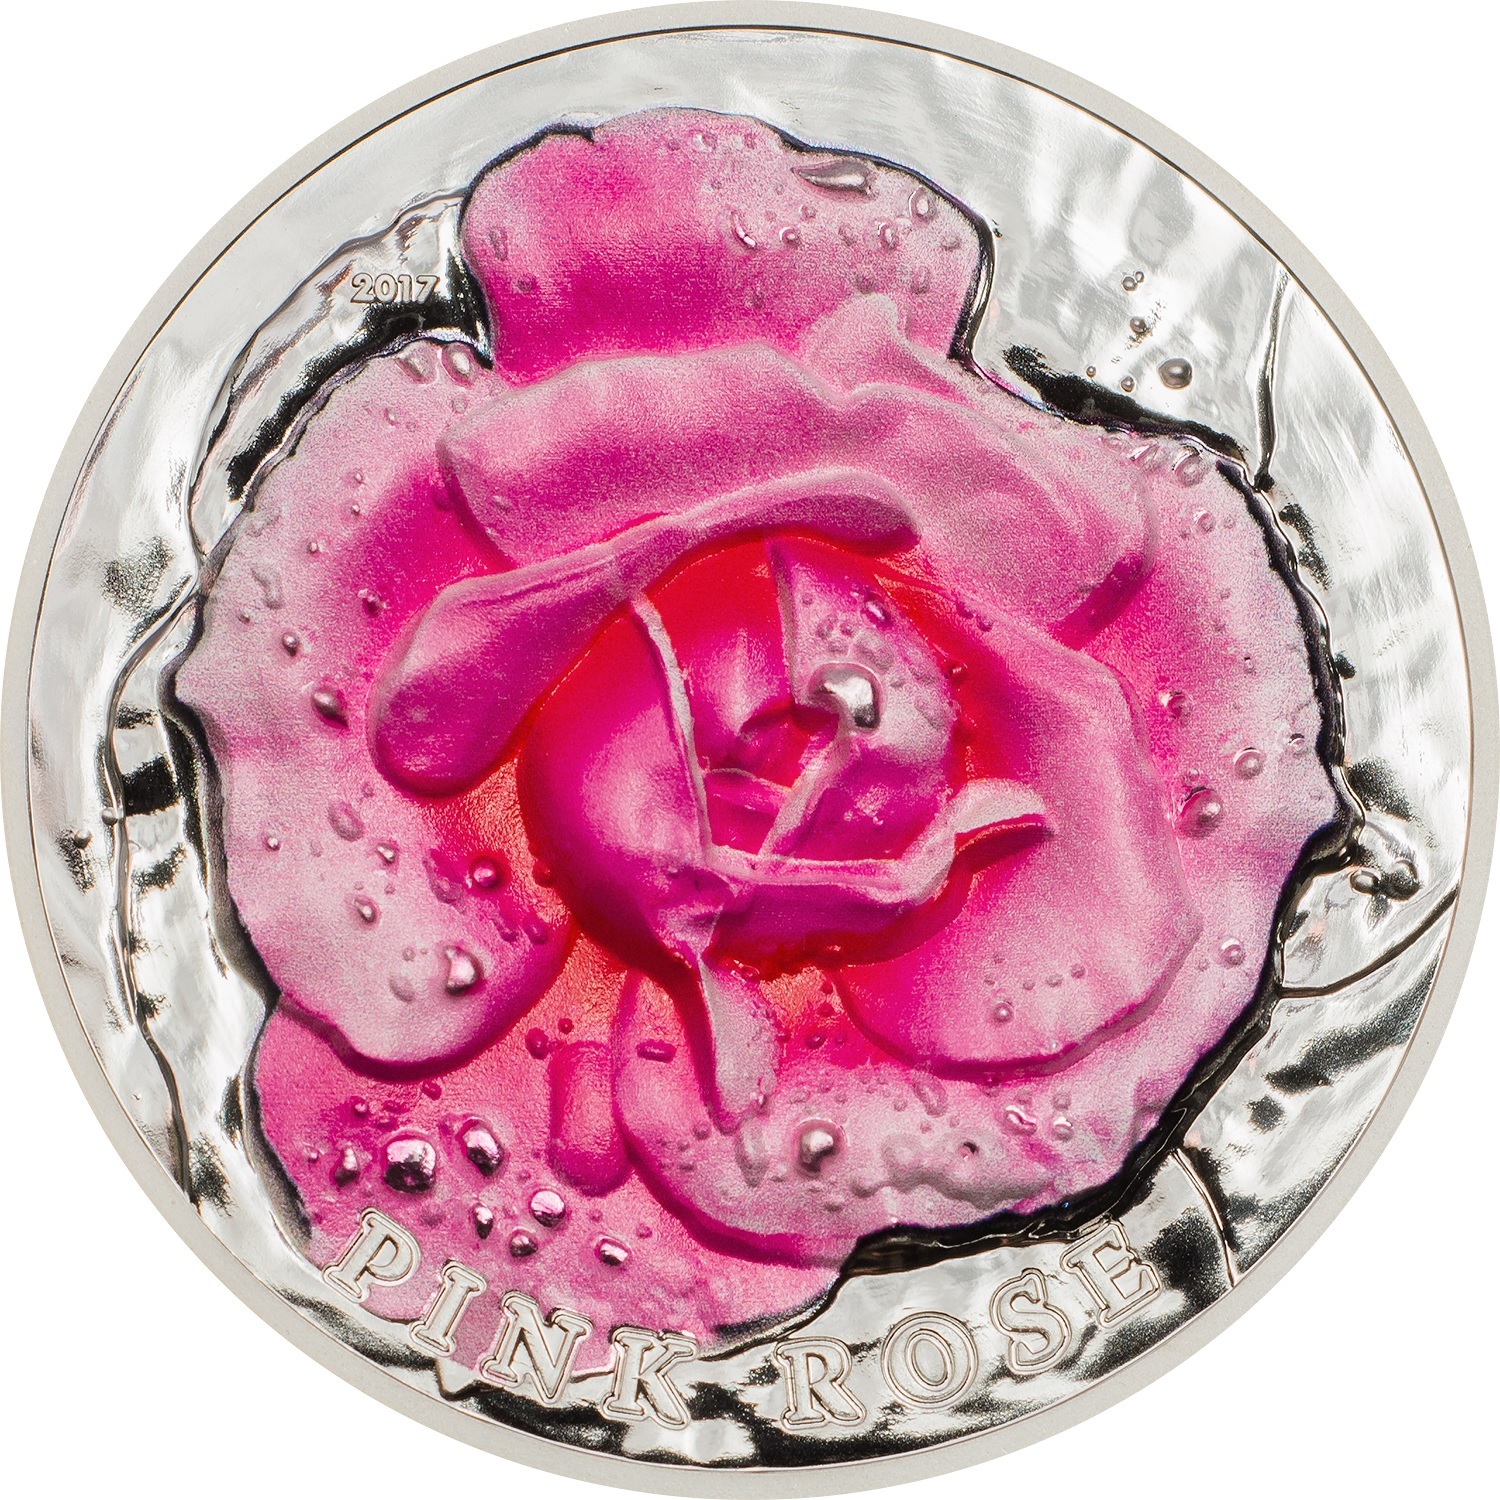 (W168.1.10.D.2017.28048) Palau 10 Dollars Pink Rose 2017 - Proof silver Reverse (zoom)